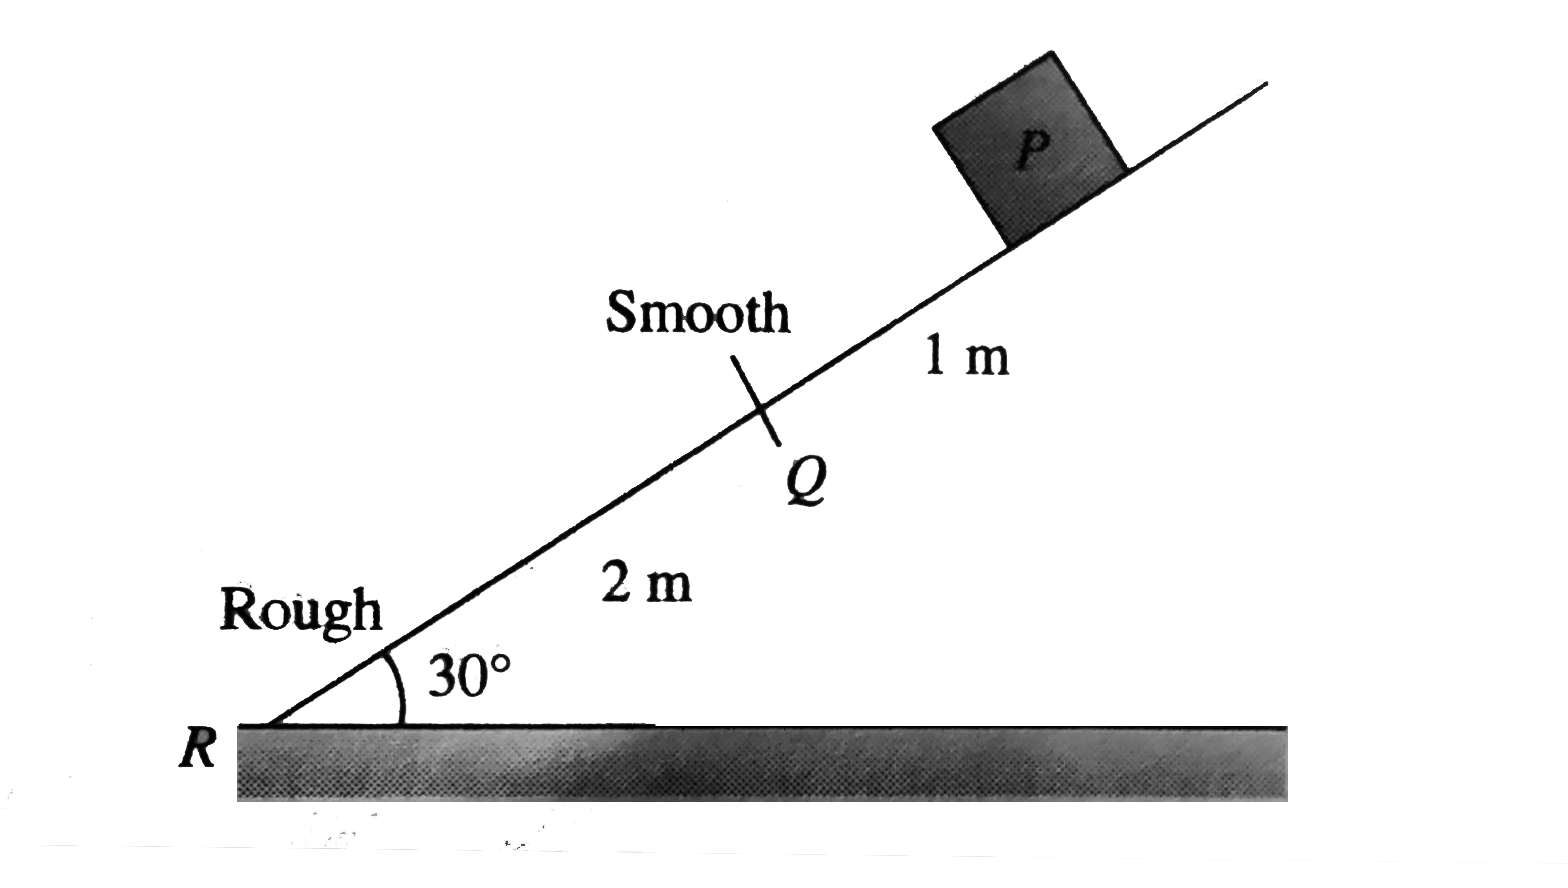 A block of mass 5.0kg slides down from the top of an inclined plane of length 3m. The first 1m of the plane is smooth and the next 2m is rough. The block is released from rest and again comes to rest at the bottom of the plane. If the plane is inclined at 30^@ with the horizontal, find the coefficient of friction on the rough portion.